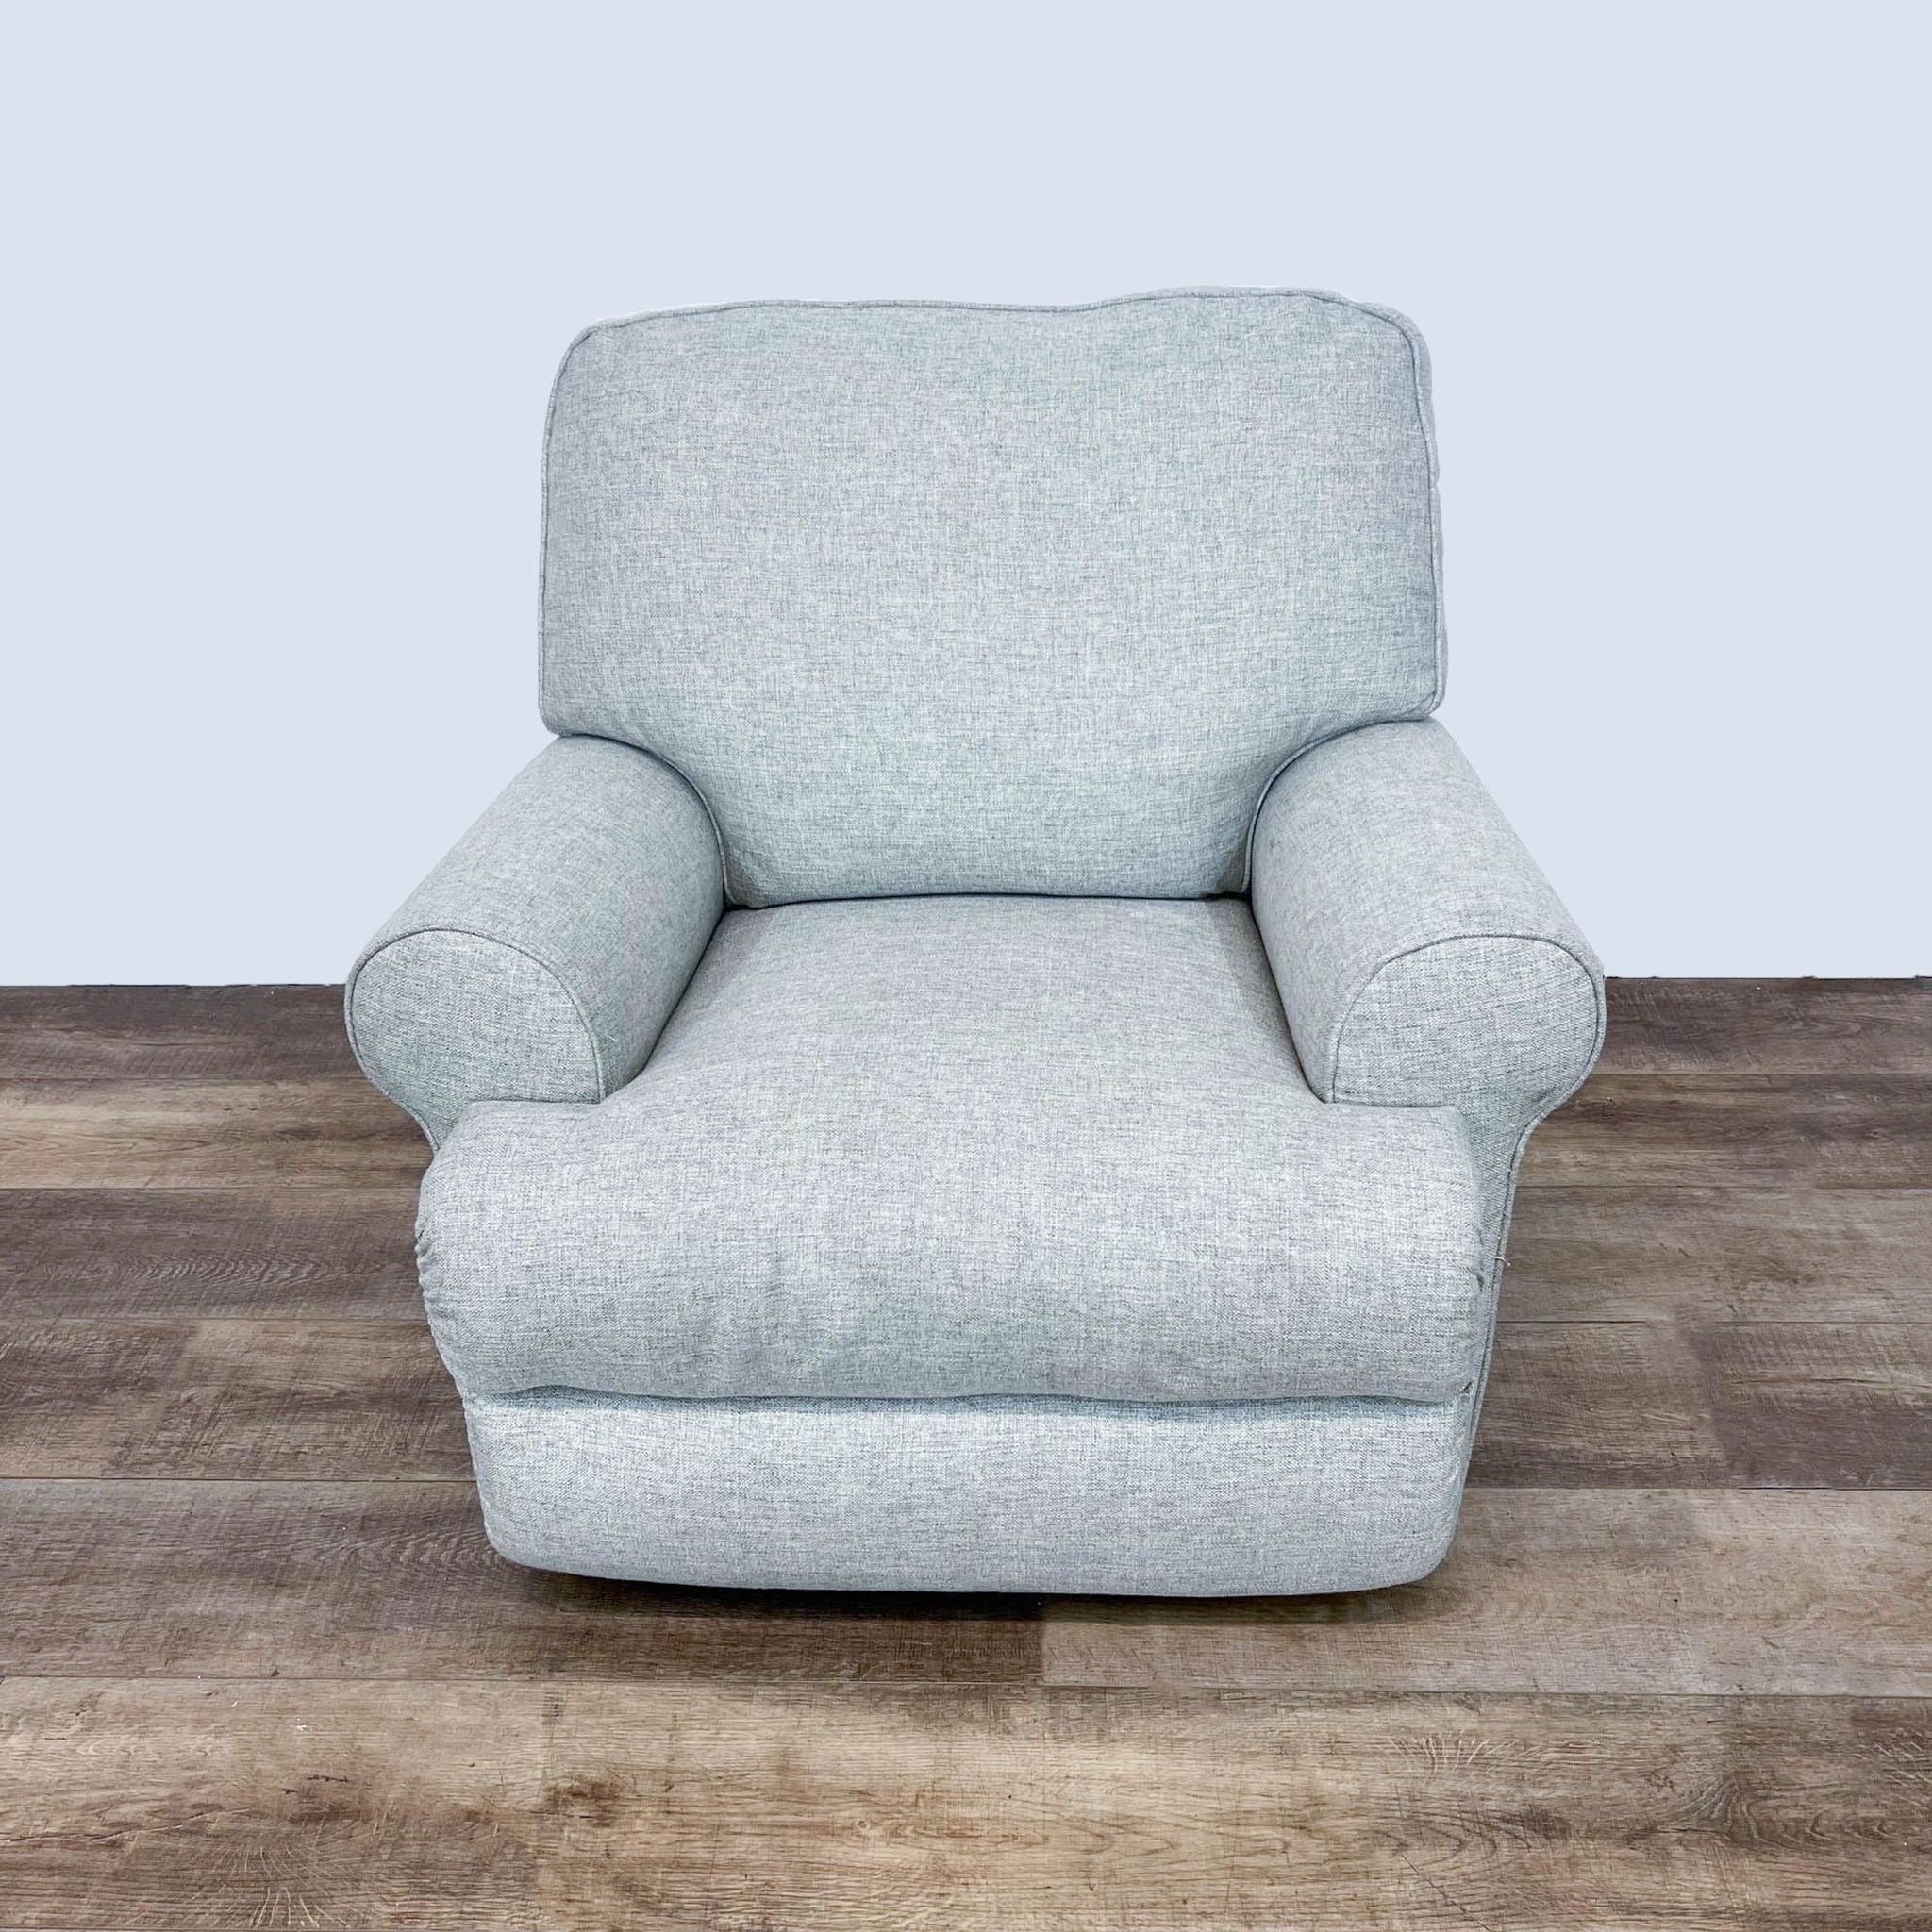 Ashley Furniture Ferncliff chair with neutral polyester upholstery, showcasing a 360-degree swivel and gentle rocking function.